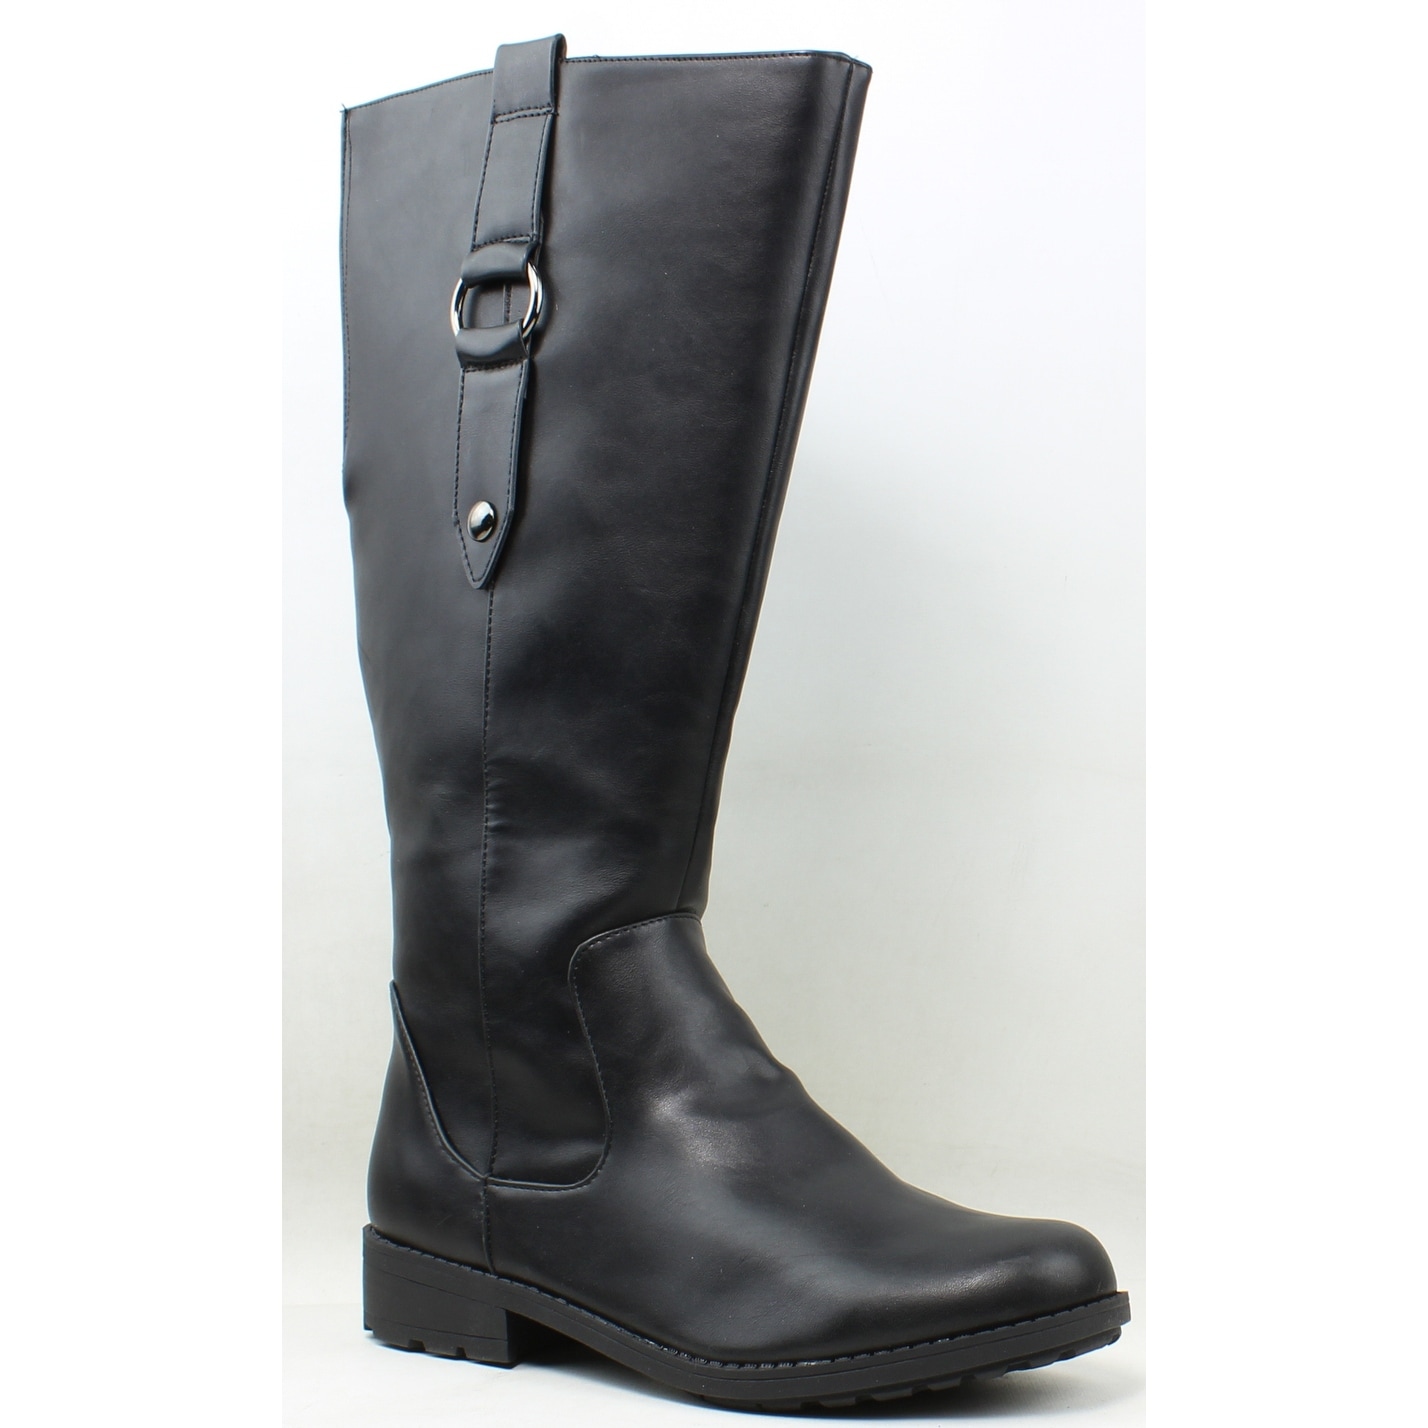 black riding boots size 9